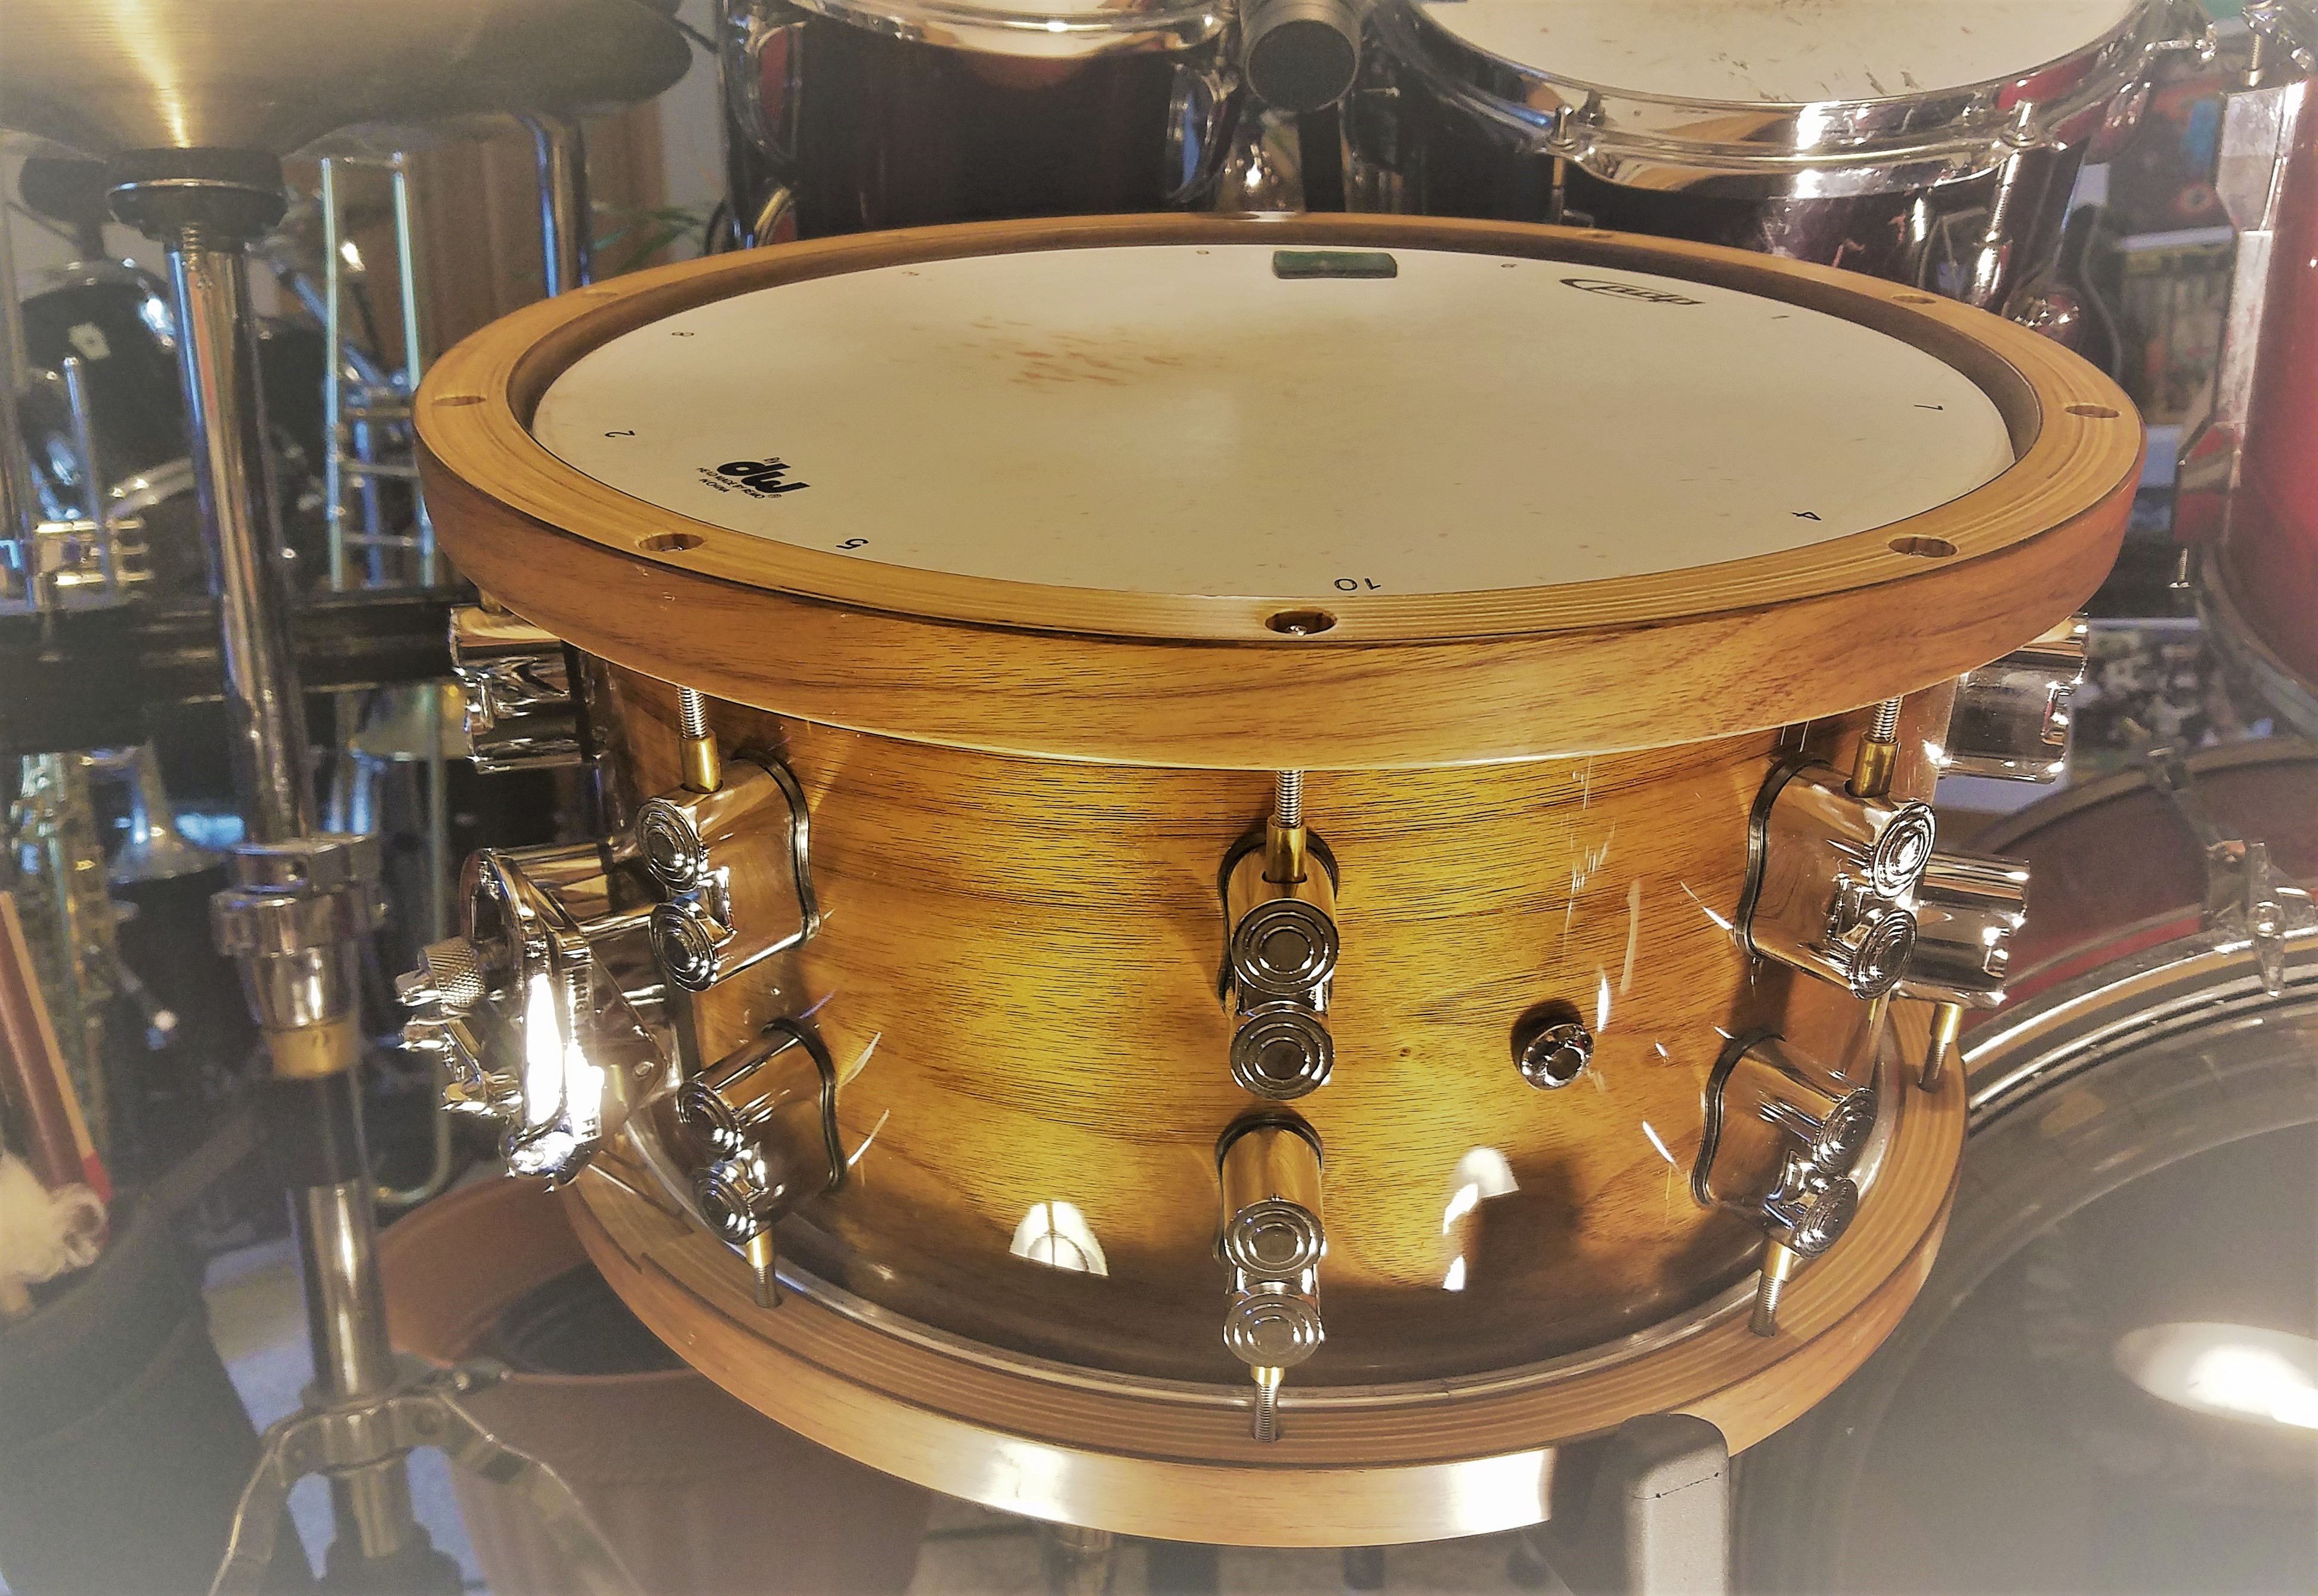 PDP snare from side in drum kit